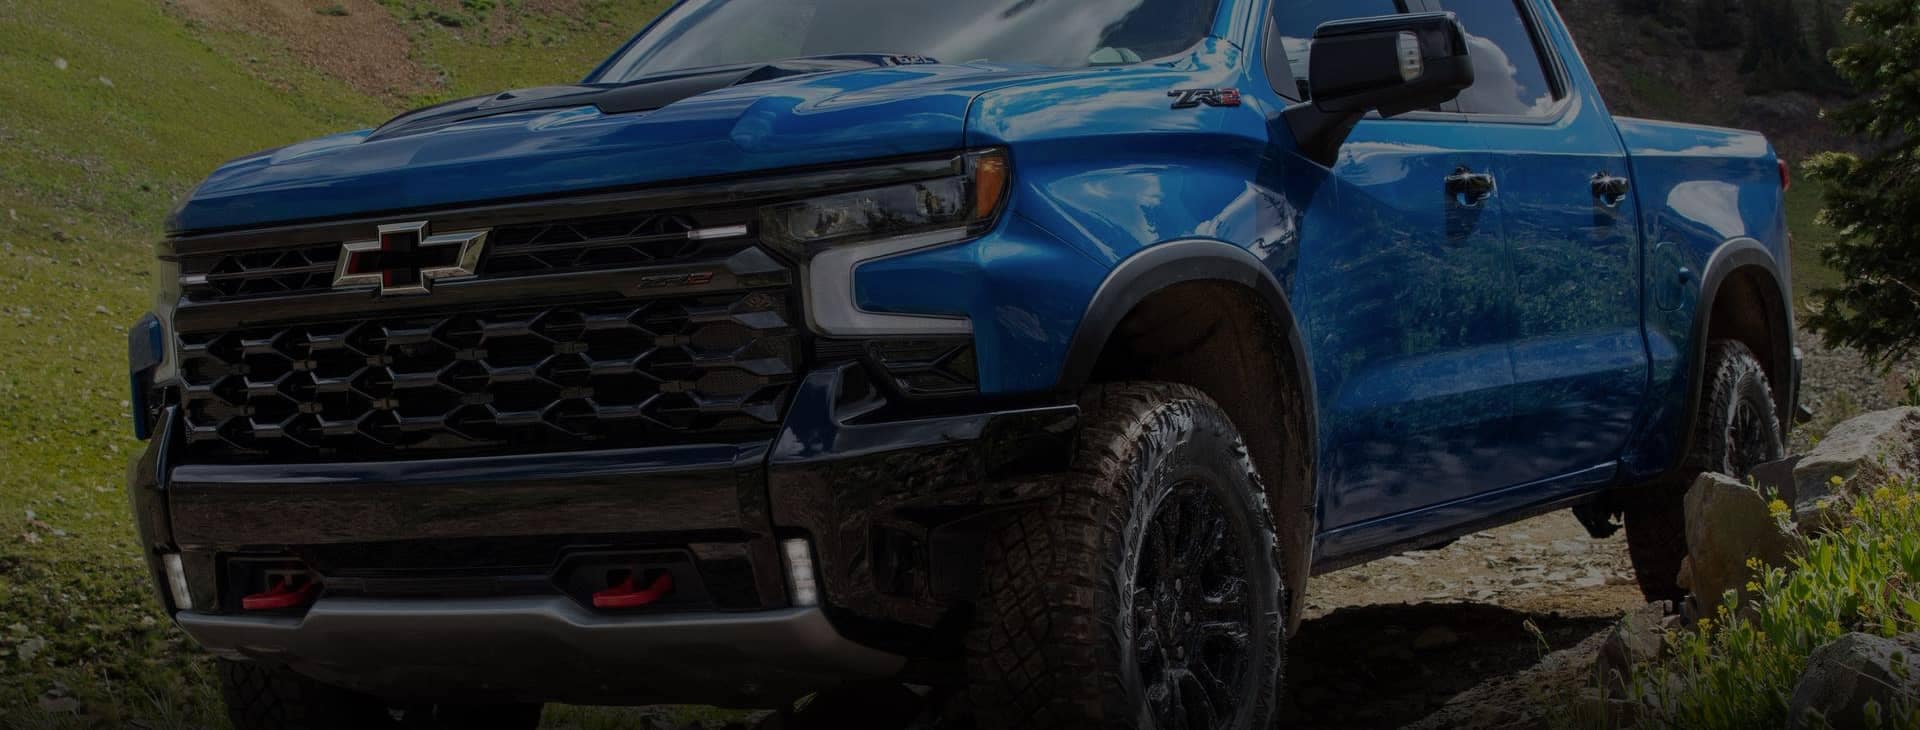 Blue Chevrolet truck driving off road